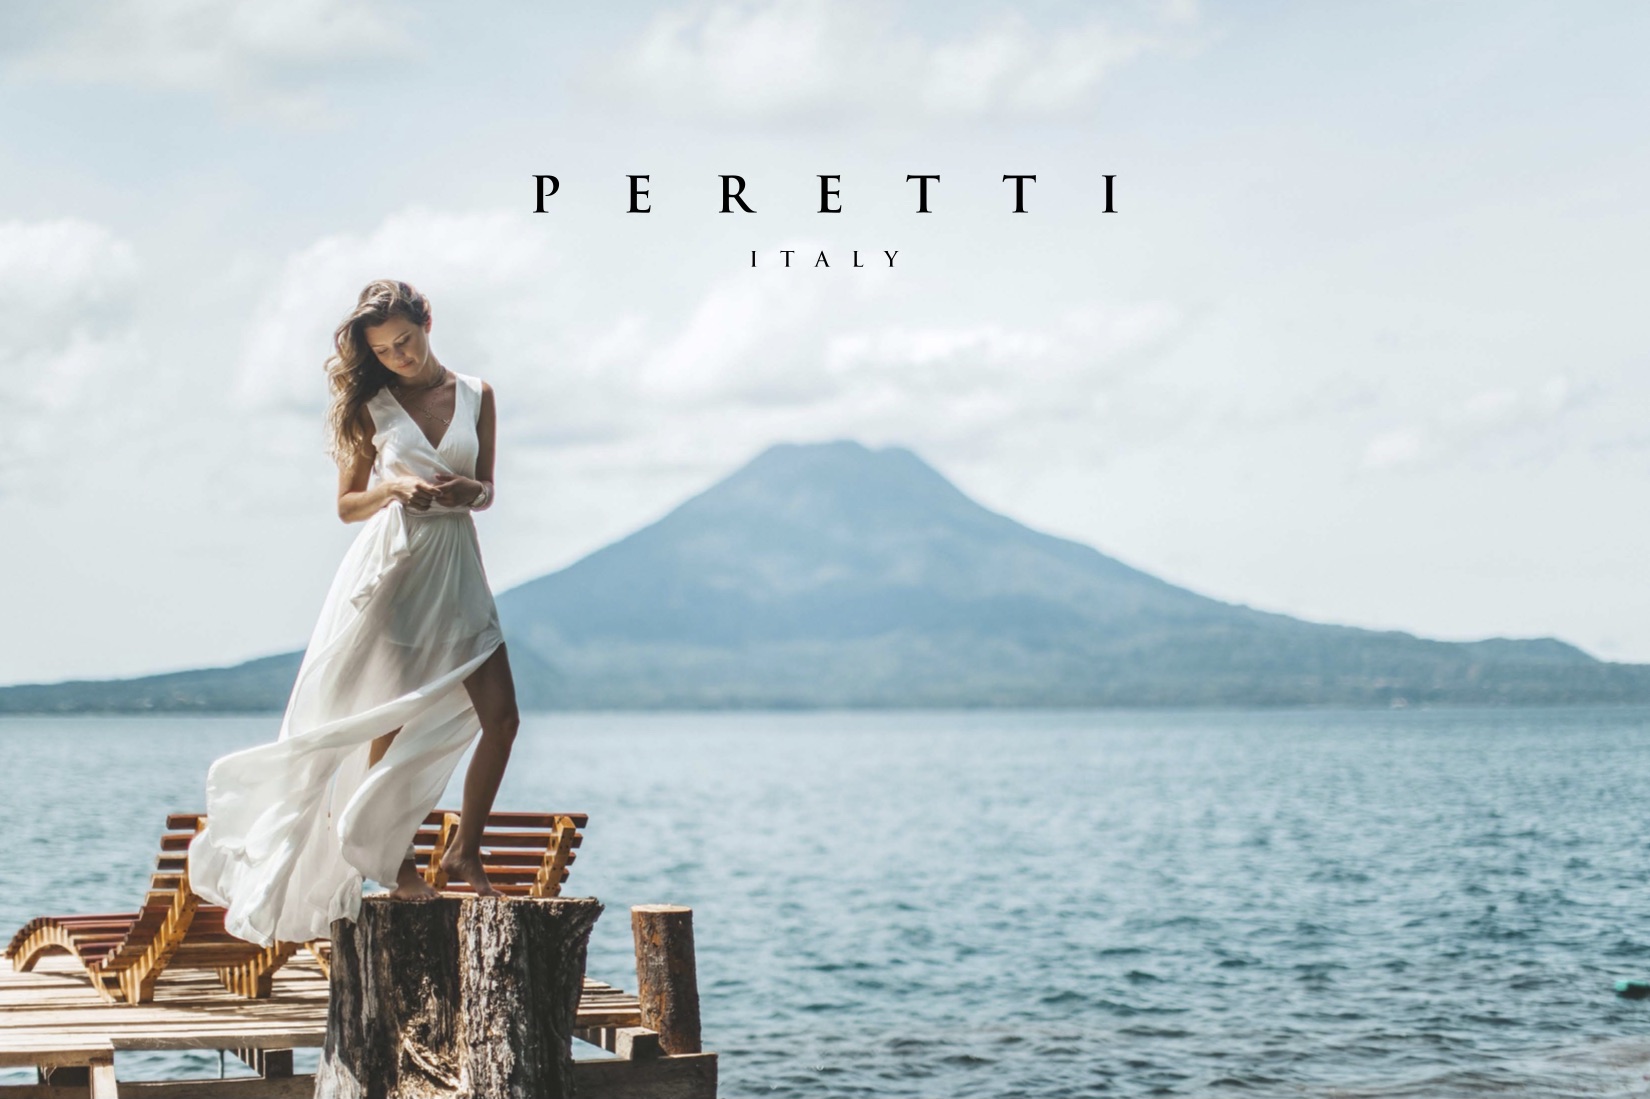 Peretti Italy Brand Guidelines Woman in white dress standing on a stump looking down by a pier and water with a mountain in the background